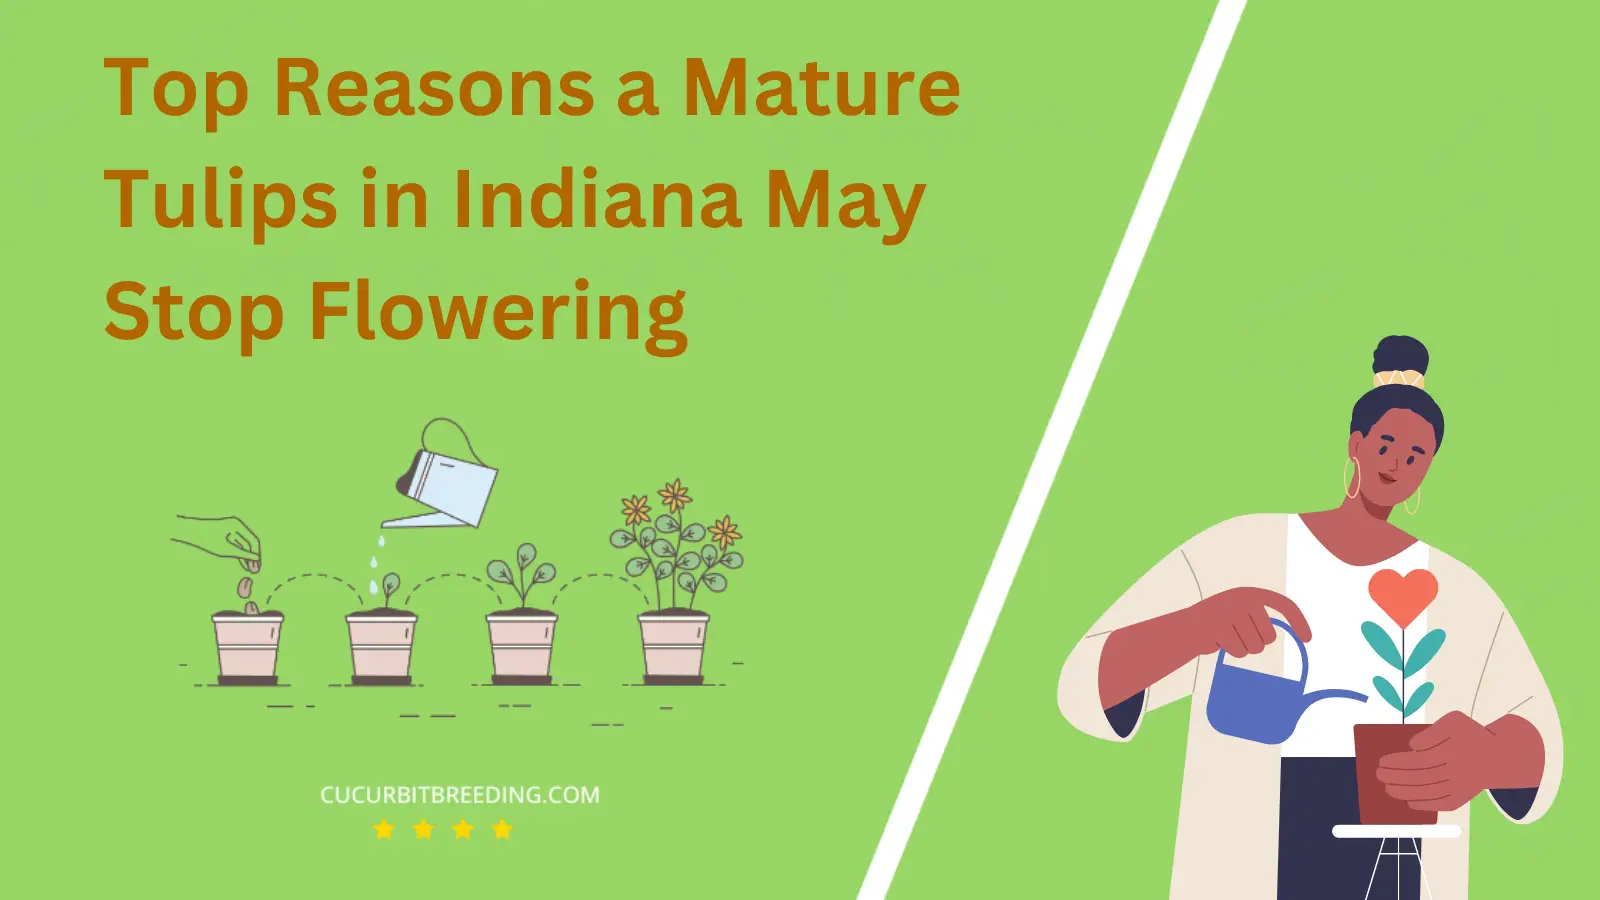 Top Reasons a Mature Tulips in Indiana May Stop Flowering